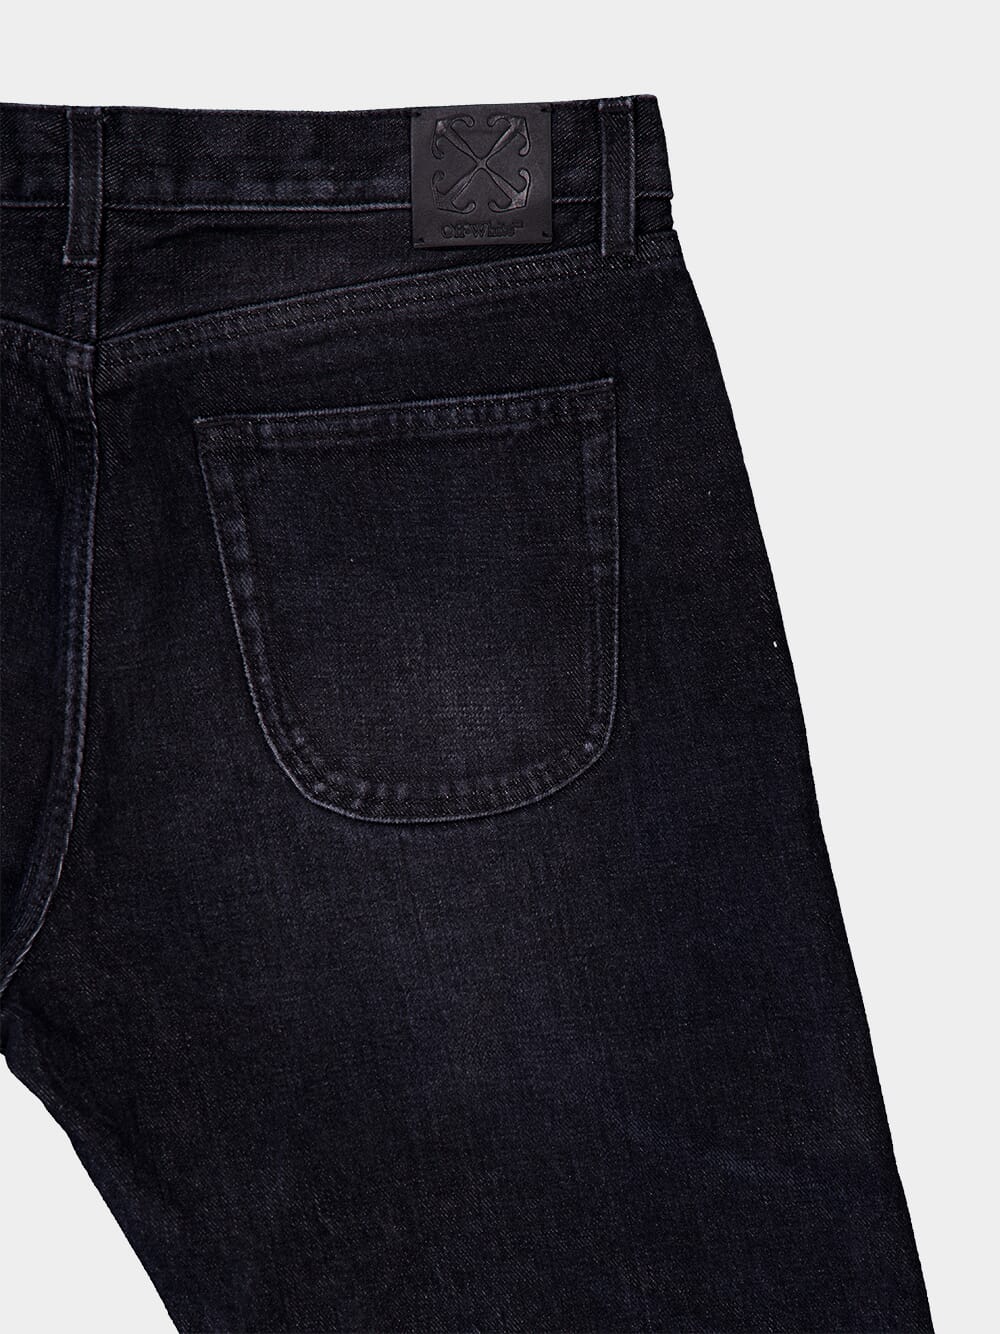 Off-WhiteArr Tab Logo-Patch Tapered Jeans at Fashion Clinic